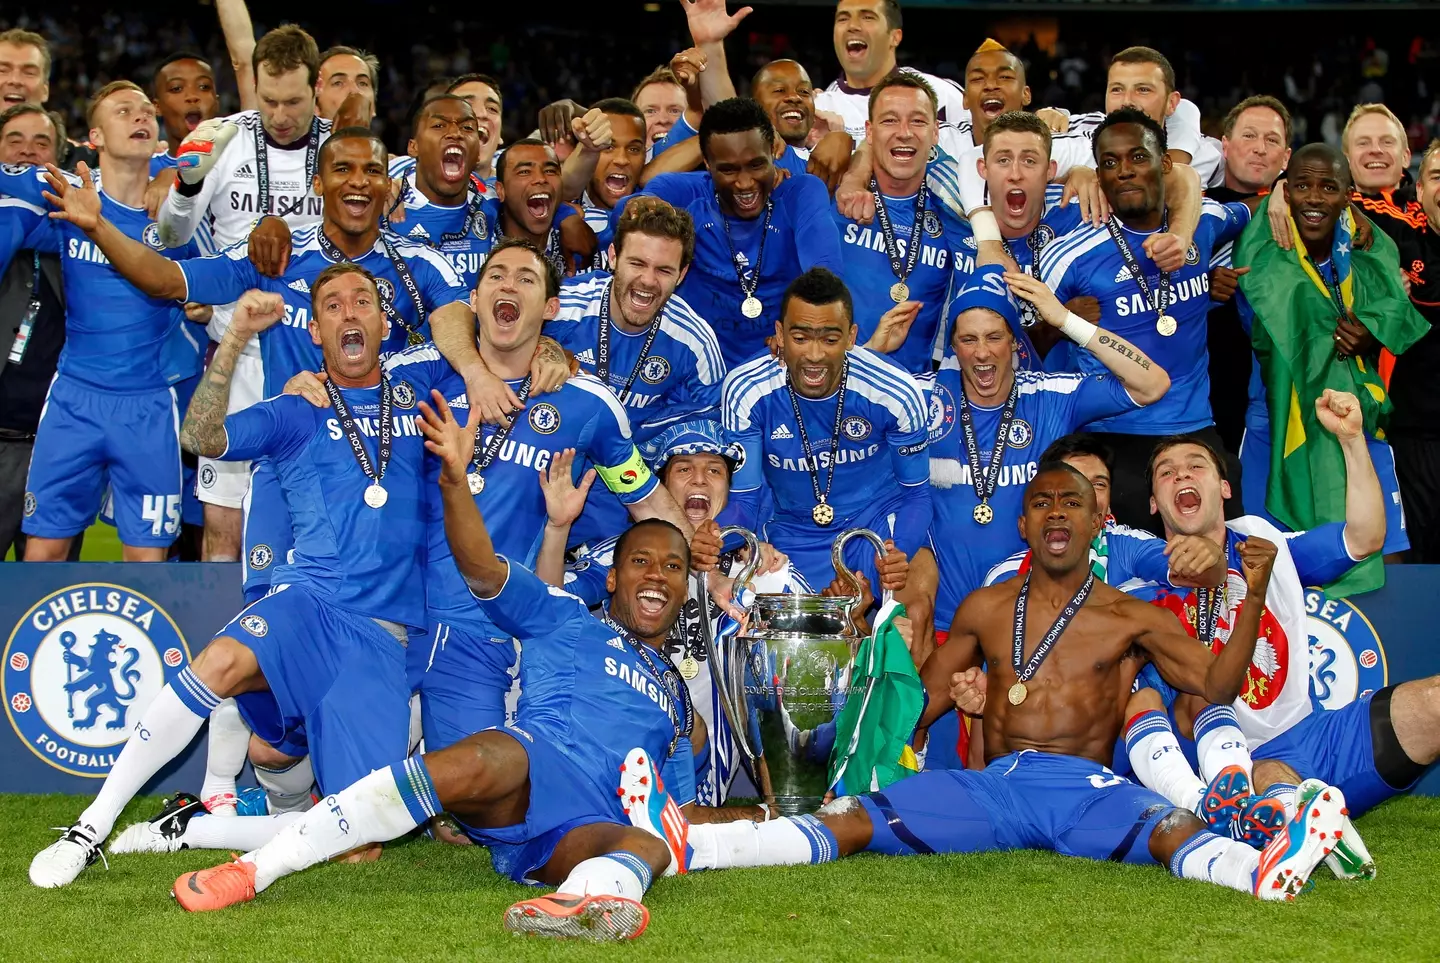 Chelsea's Champions League win in 2012 cost Spurs a place in the competition for the following season. Image: PA Images